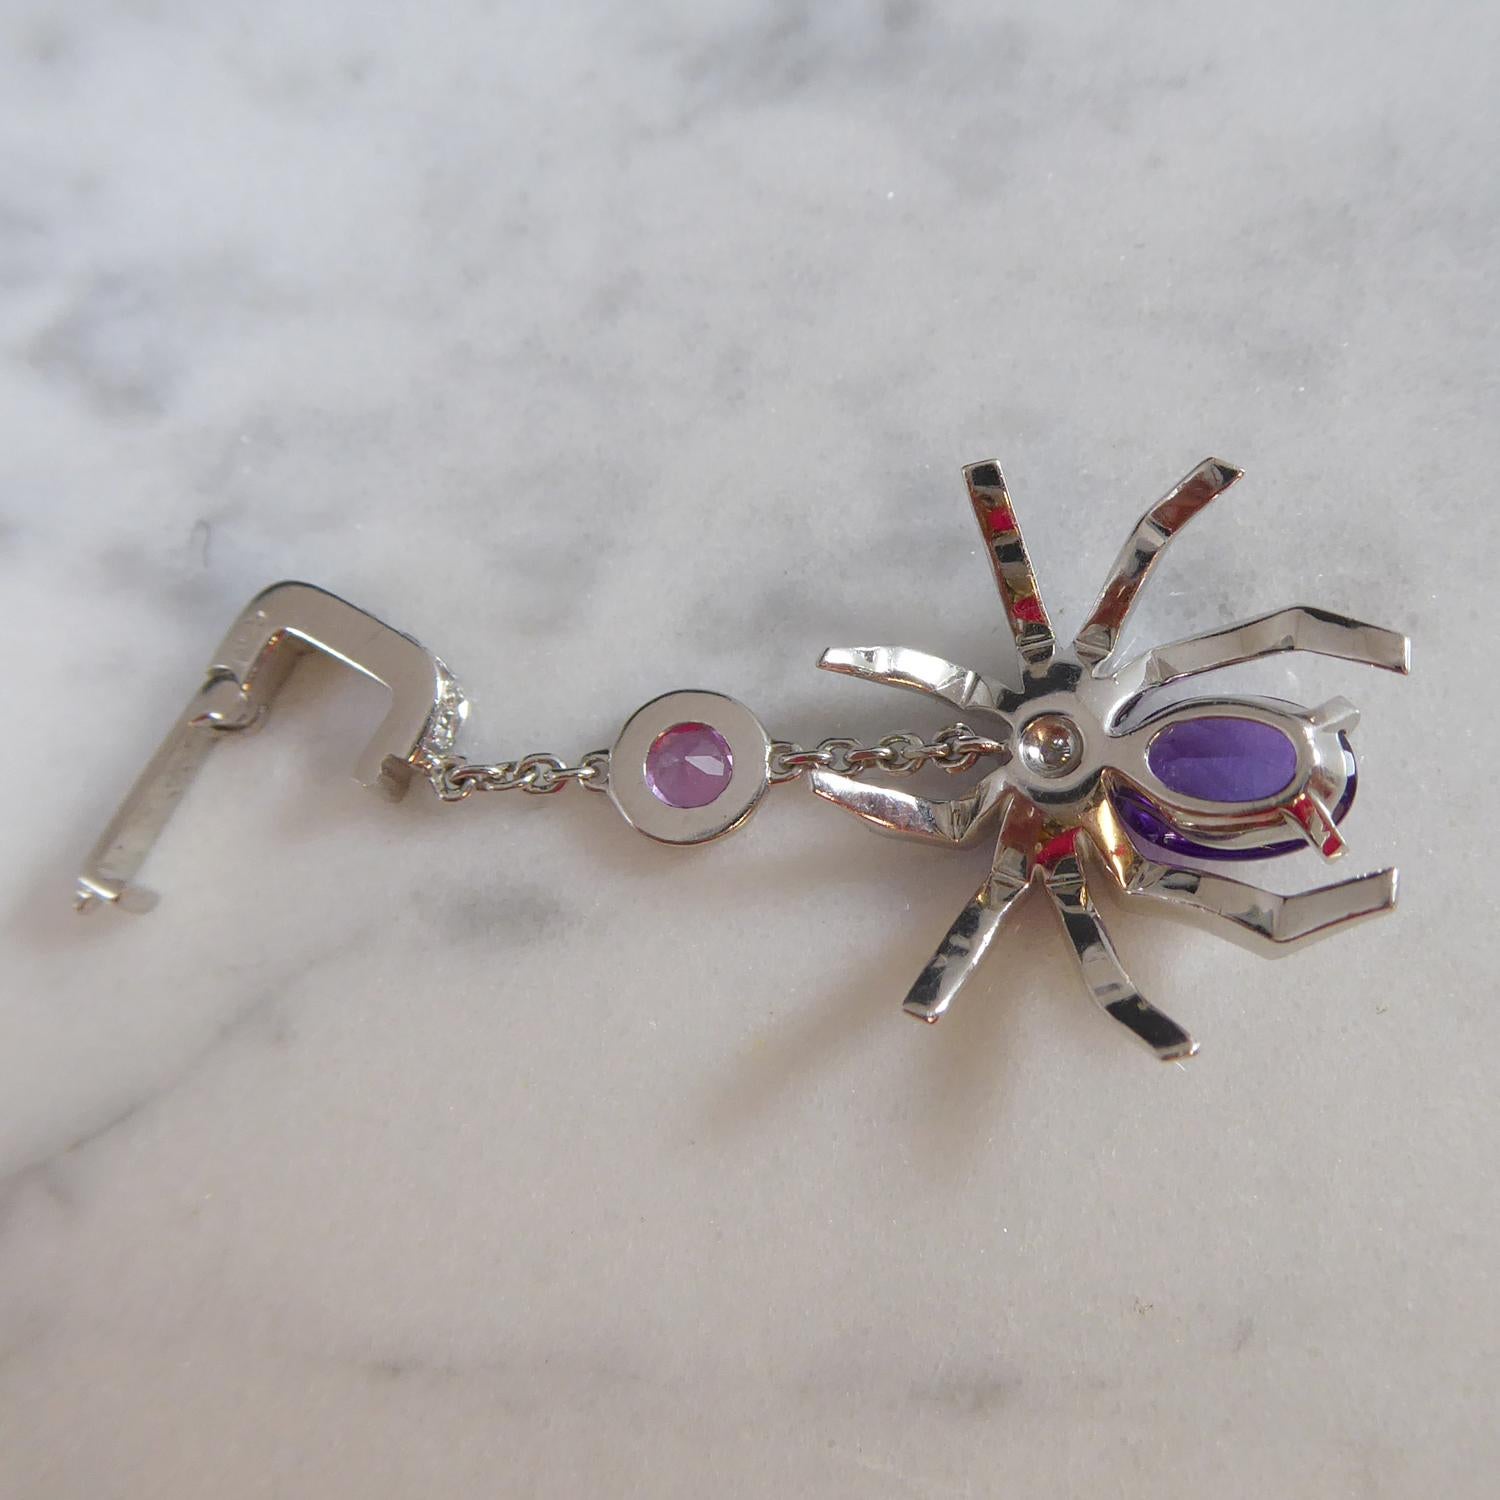 Chaumet Attrape-Moi Earrings, Diamond Set Spider's Web with Amethyst Spider 2